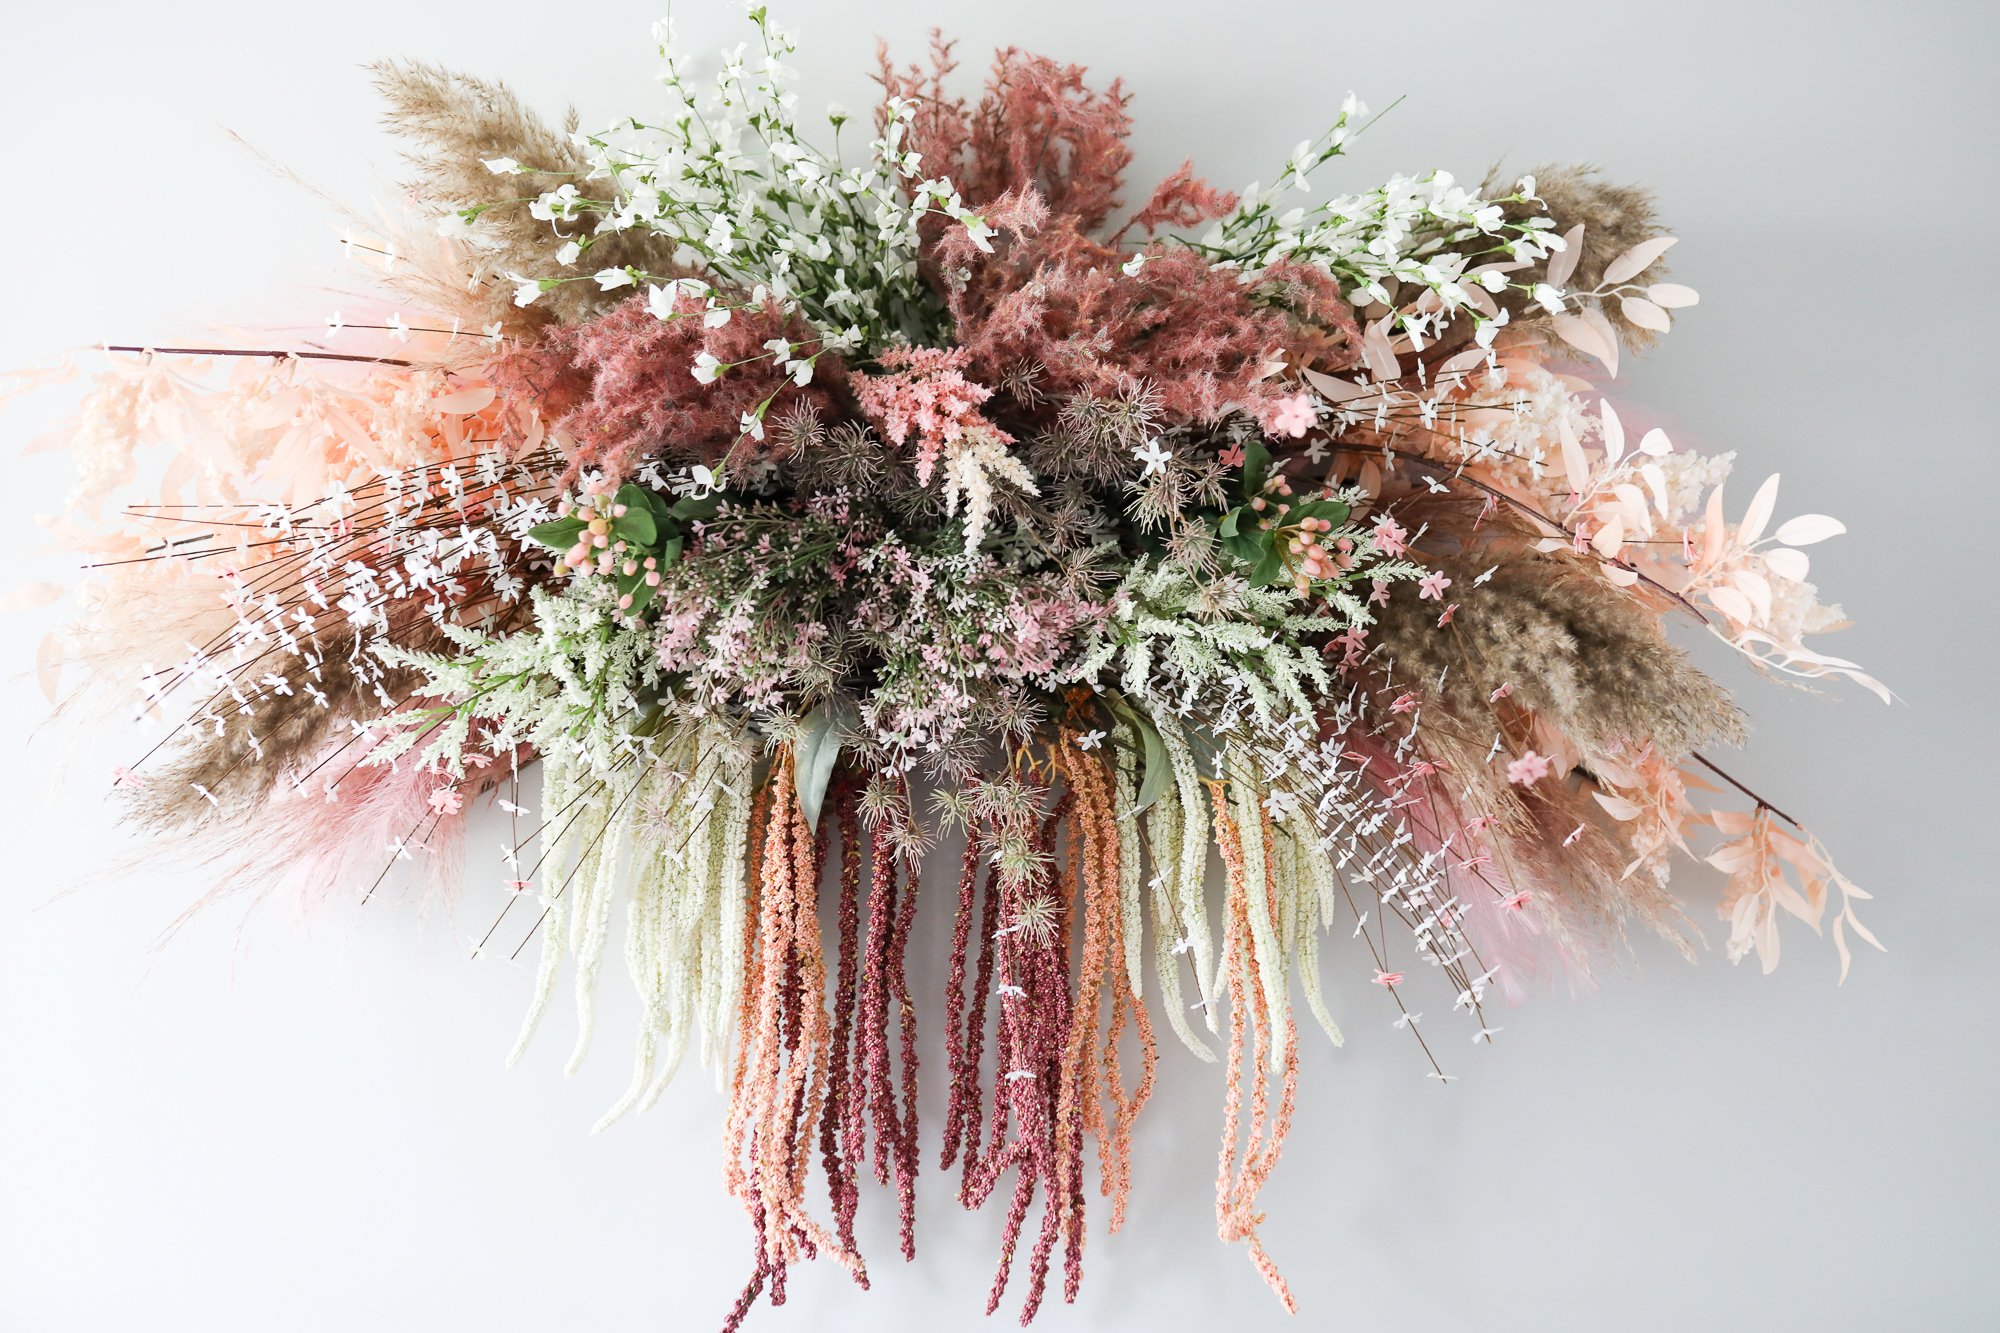 How to Make a Hanging Floral Installation with Dried Botanicals